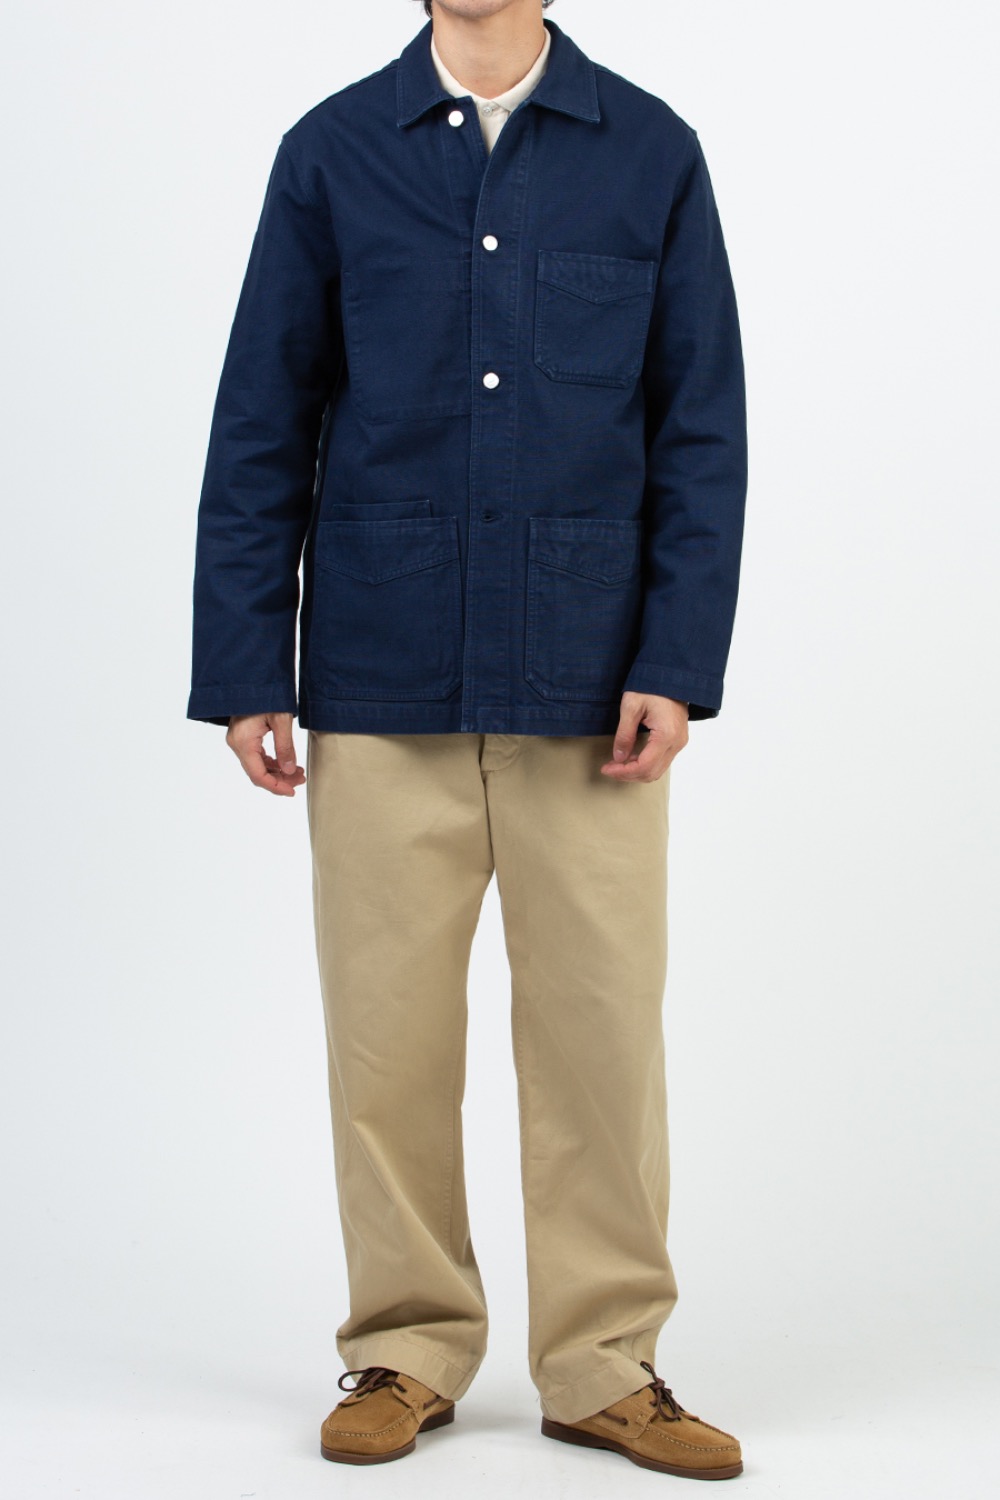 (CARRY OVER) NAVY COTTON CANVAS FIVE-POCKET CHORE JACKET NAVY